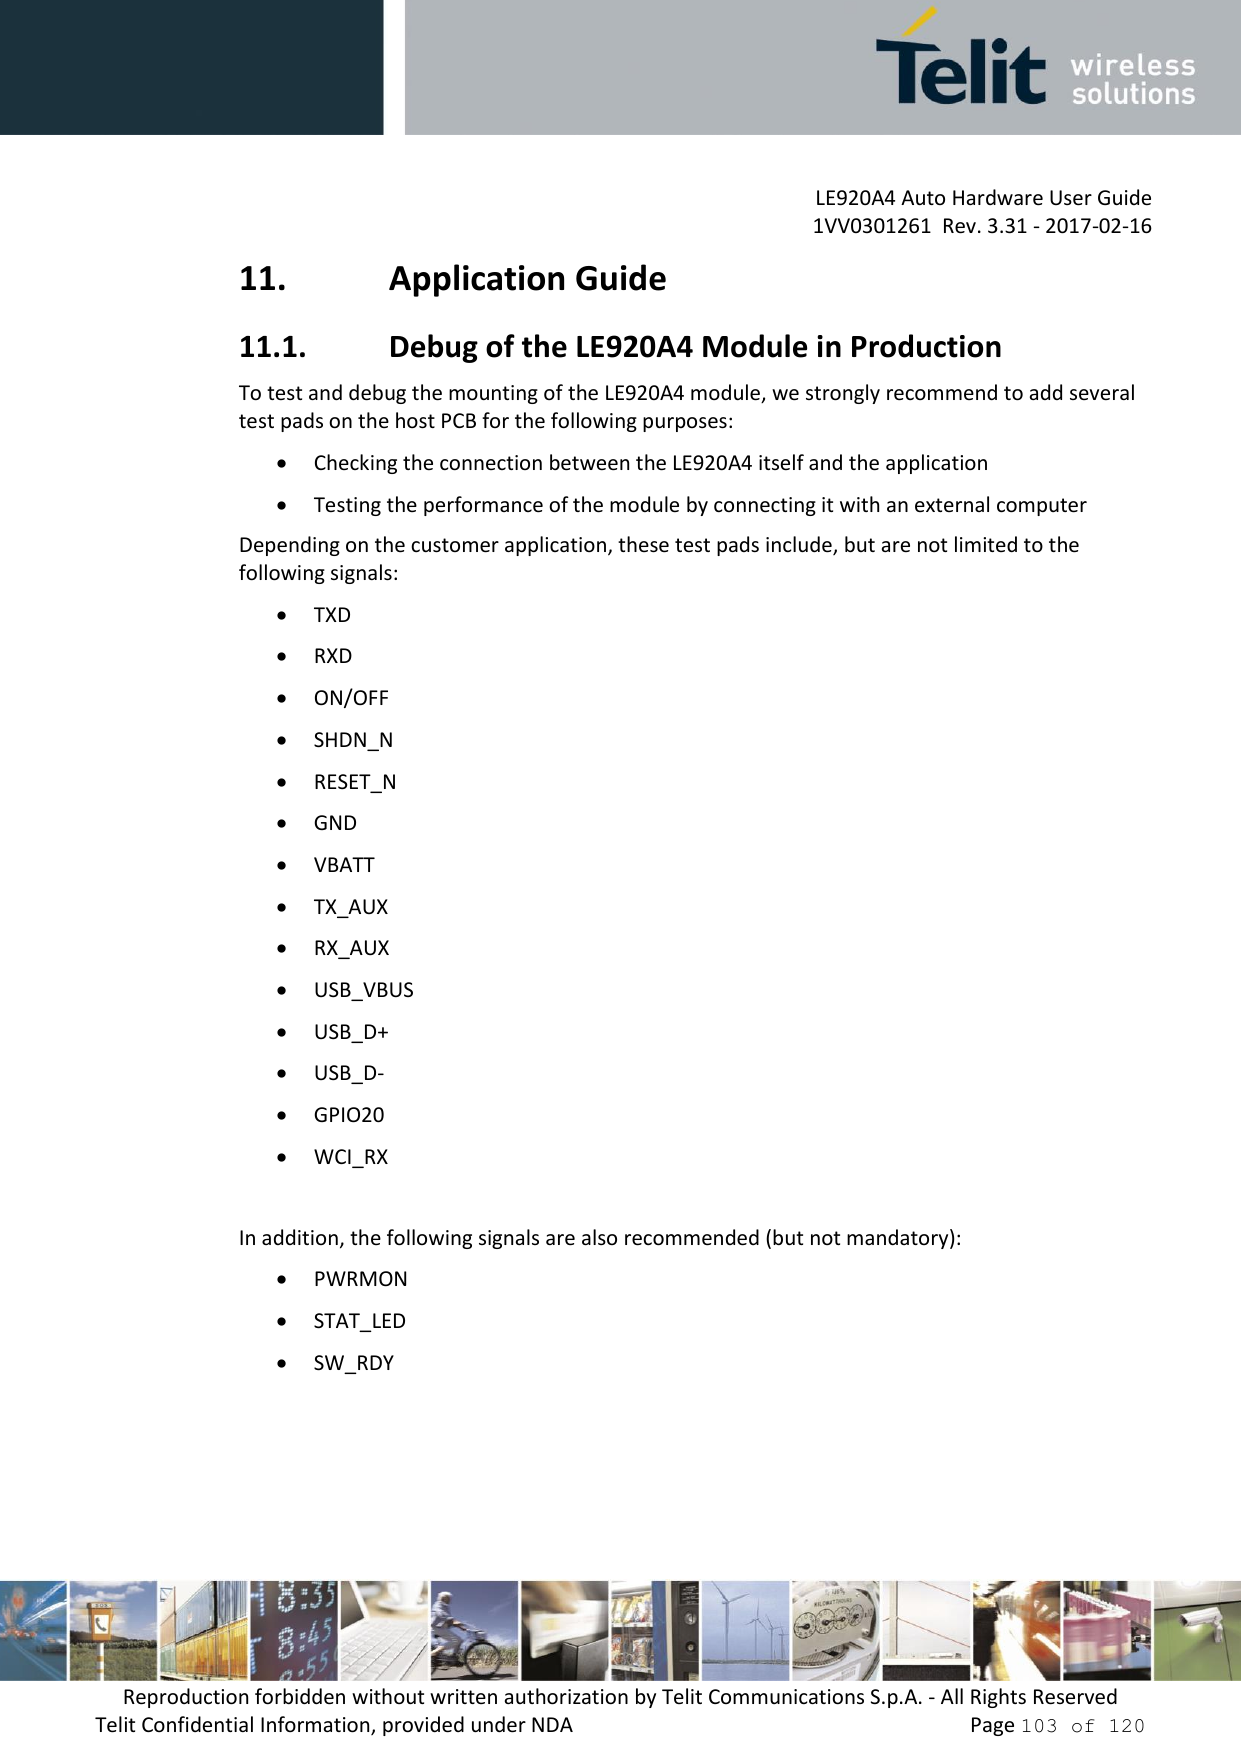 LE920A4 Auto Hardware User Guide 1VV0301261  Rev. 3.31 - 2017-02-16 Reproduction forbidden without written authorization by Telit Communications S.p.A. - All Rights Reserved Telit Confidential Information, provided under NDA   Page 103 of 120 11. Application Guide11.1. Debug of the LE920A4 Module in ProductionTo test and debug the mounting of the LE920A4 module, we strongly recommend to add several test pads on the host PCB for the following purposes: Checking the connection between the LE920A4 itself and the applicationTesting the performance of the module by connecting it with an external computerDepending on the customer application, these test pads include, but are not limited to the following signals: TXDRXDON/OFFSHDN_NRESET_NGNDVBATTTX_AUXRX_AUXUSB_VBUSUSB_D+USB_D-GPIO20WCI_RXIn addition, the following signals are also recommended (but not mandatory): PWRMONSTAT_LEDSW_RDY